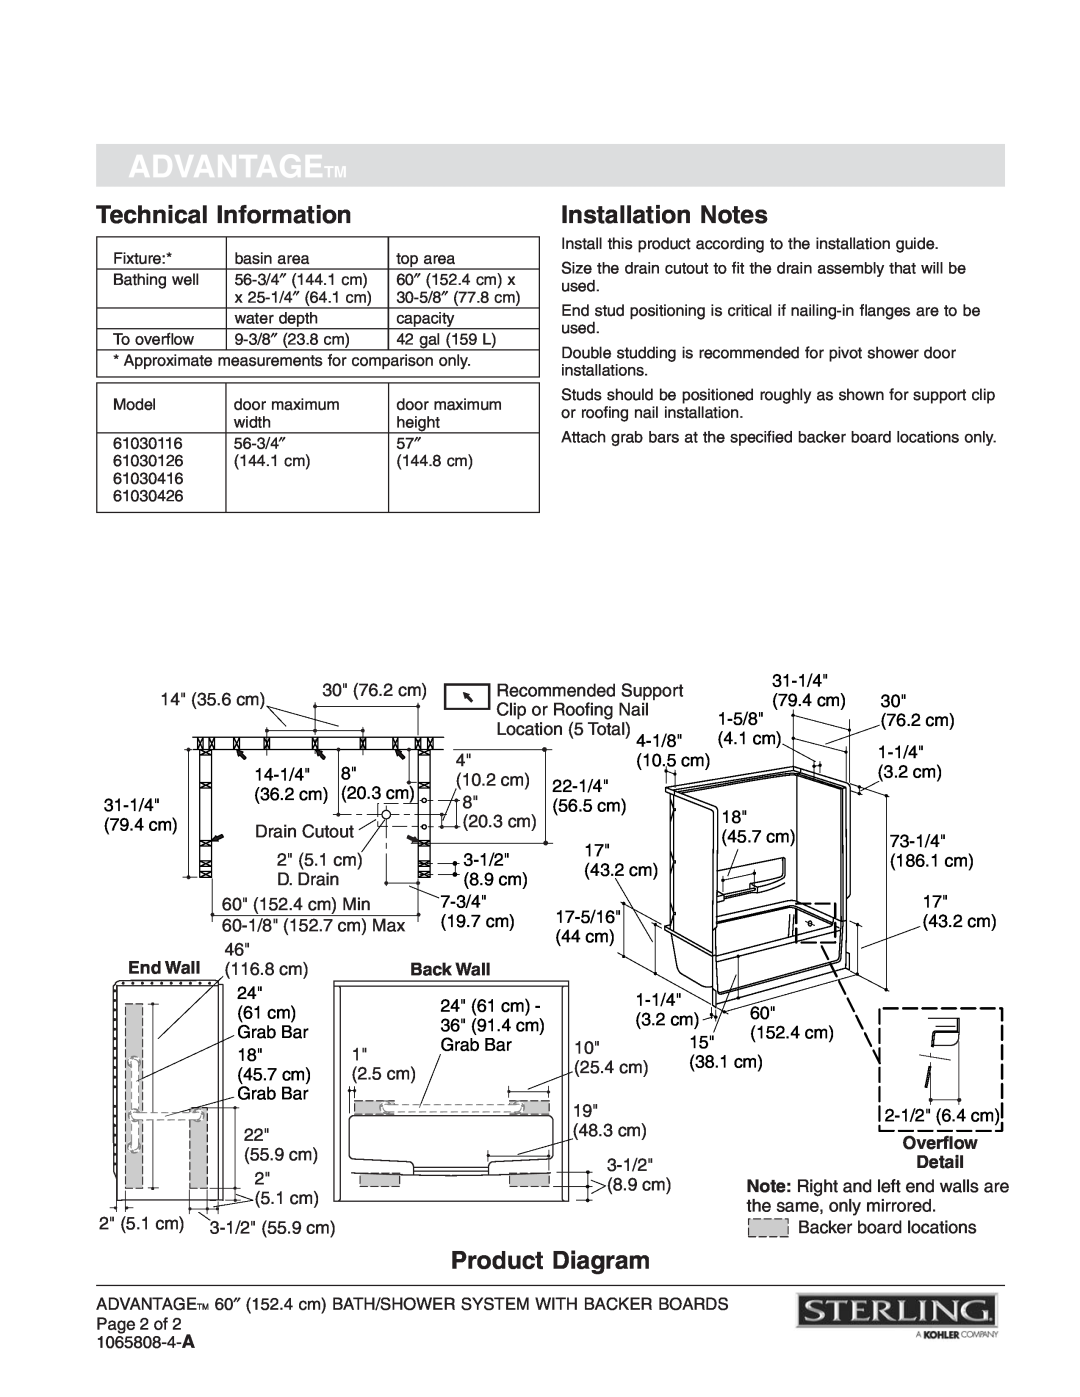 Sterling Plumbing 61030116 Technical Information, Installation Notes, Product Diagram, Advantagetm, End Wall, Back Wall 